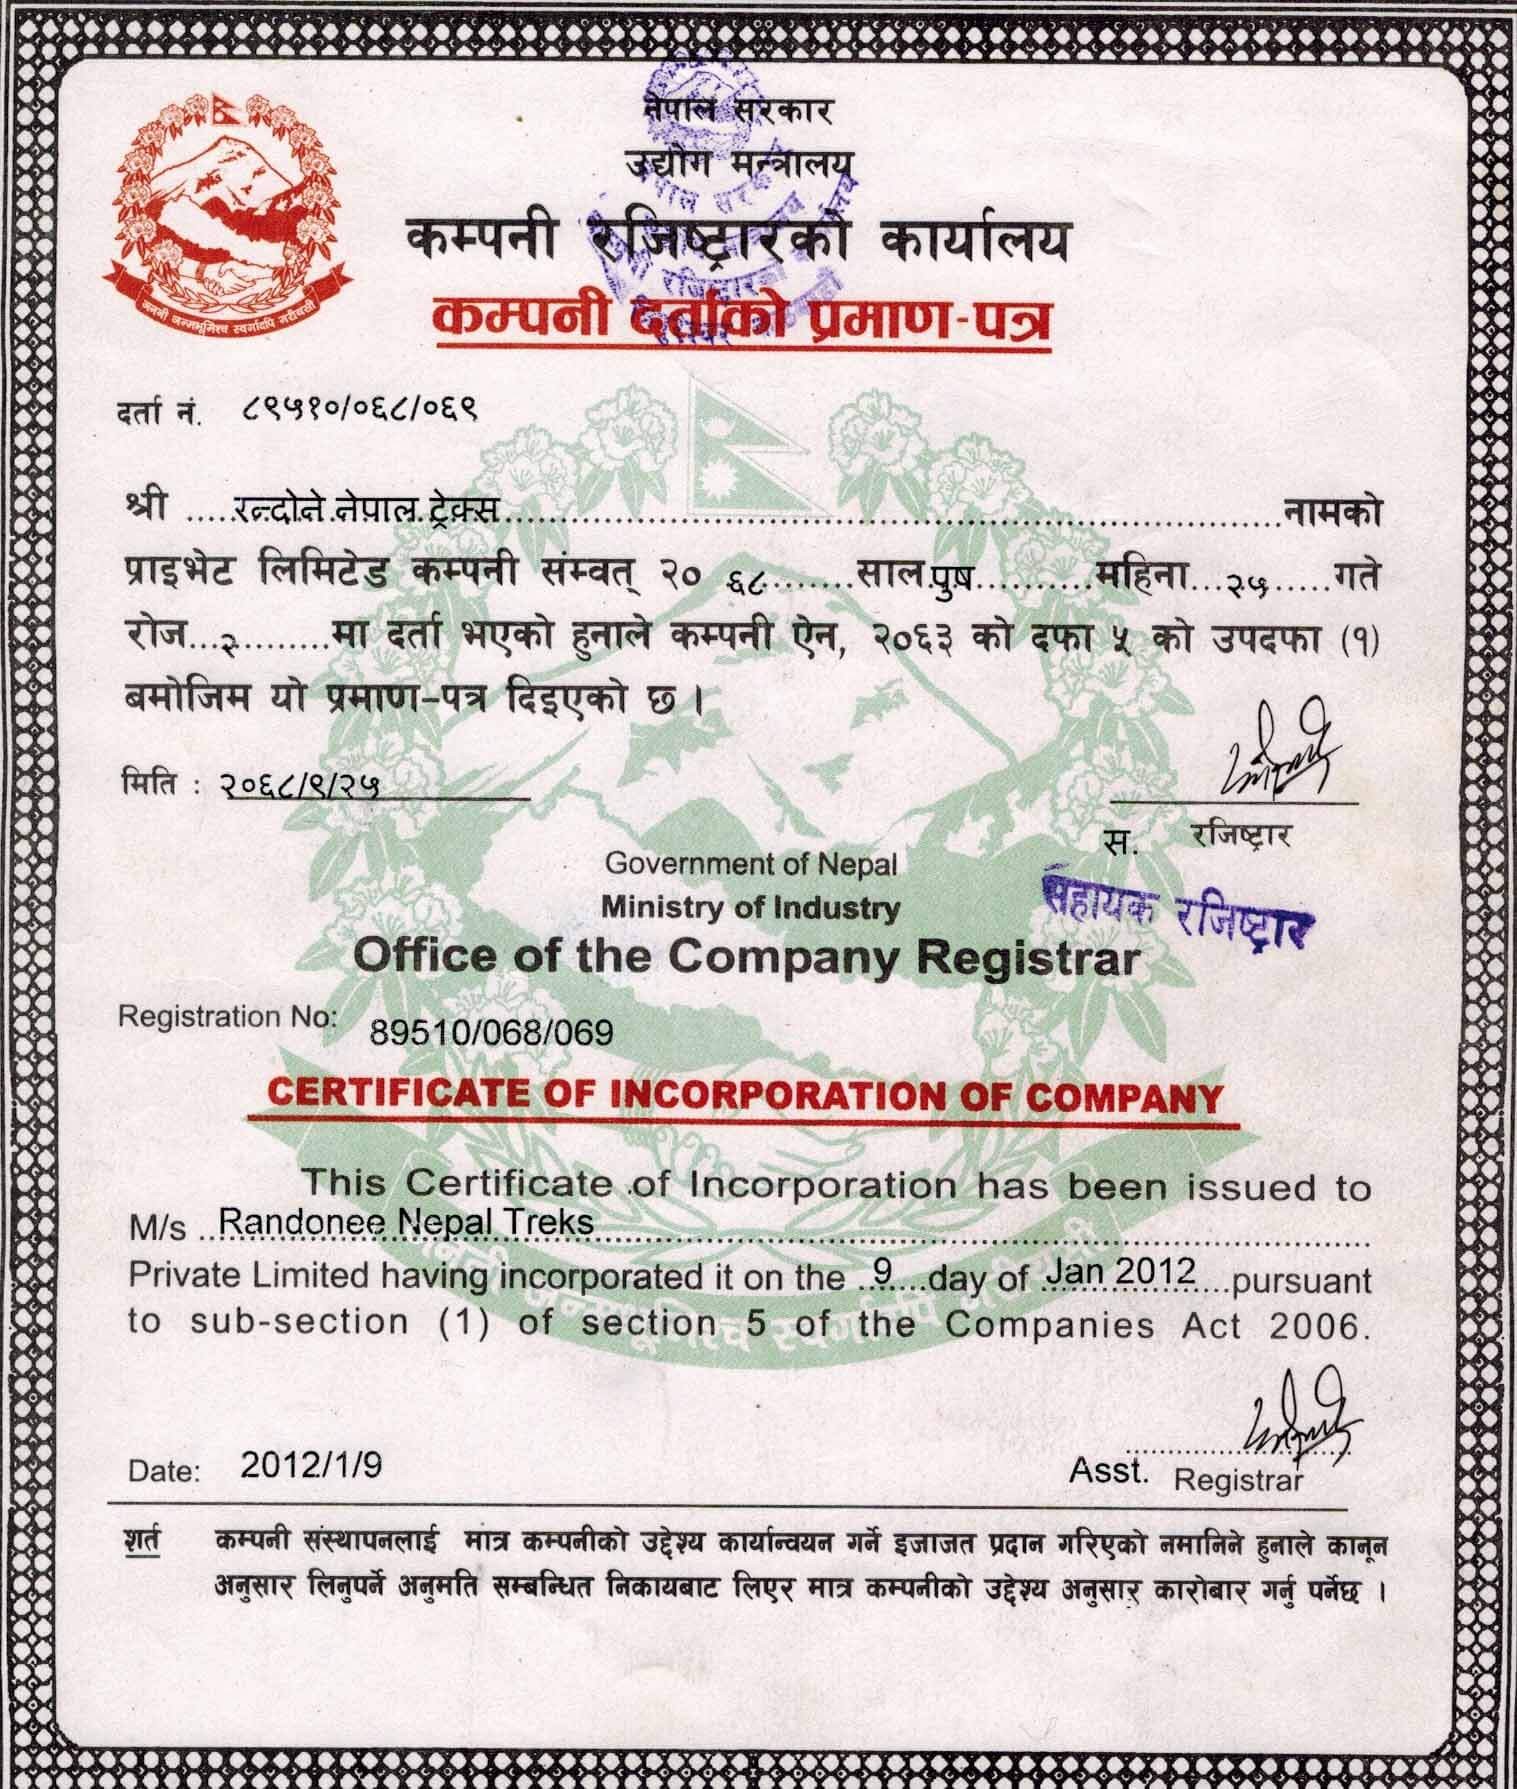 Certificate of incorporation of Company